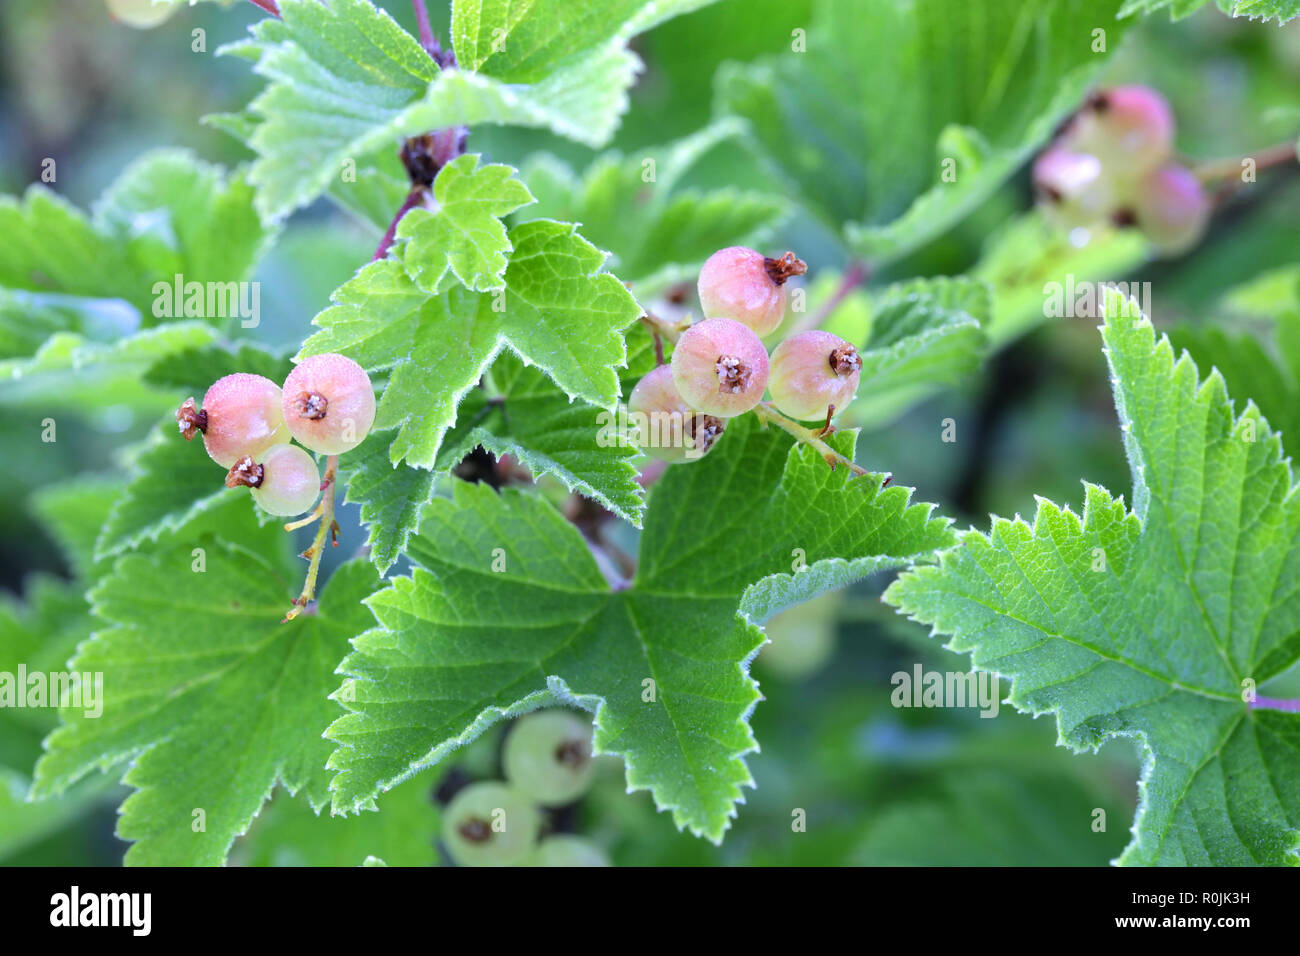 Ribes rosso o rosso bacche Ribes, Ribes rubrum Foto Stock